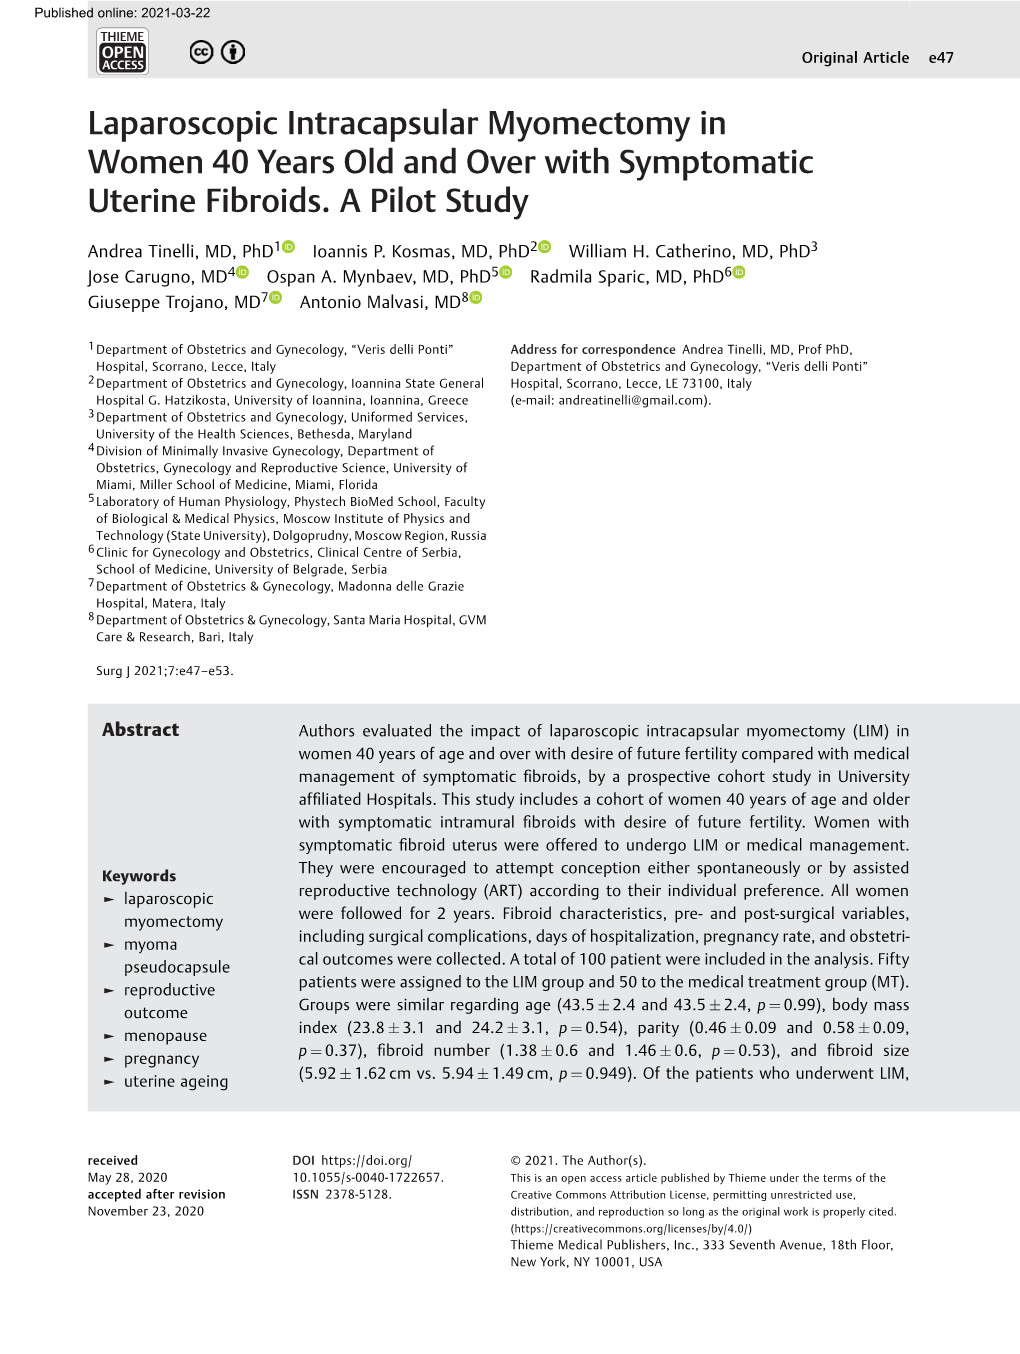 Laparoscopic Intracapsular Myomectomy in Women 40 Years Old and Over with Symptomatic Uterine Fibroids